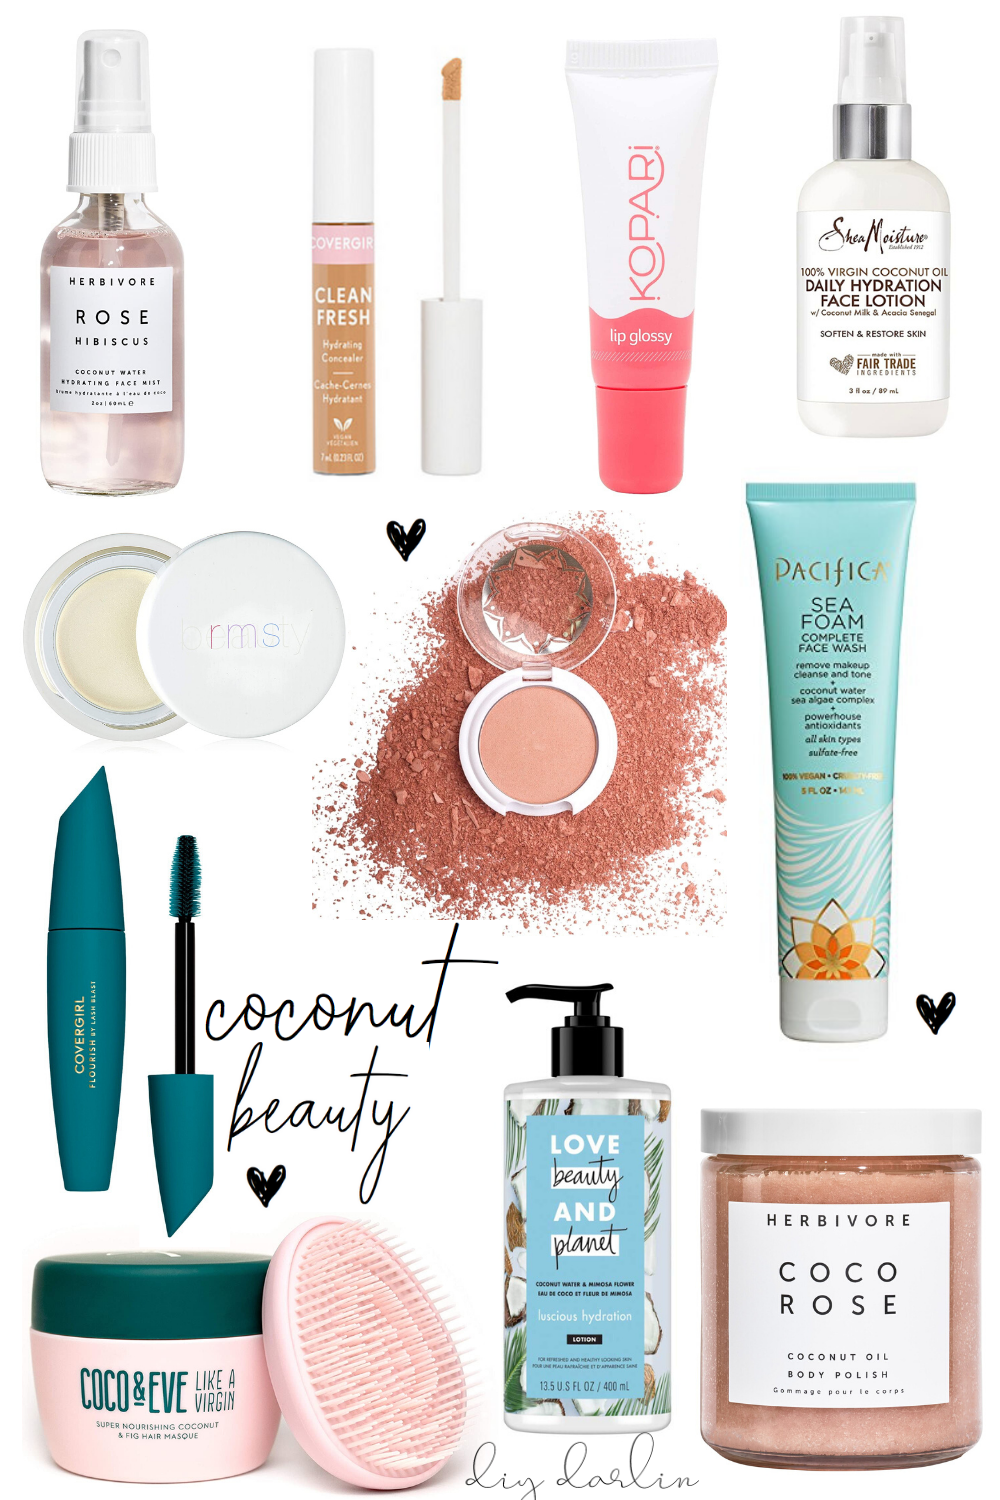 Coconut Beauty Products For a Glowing Summer